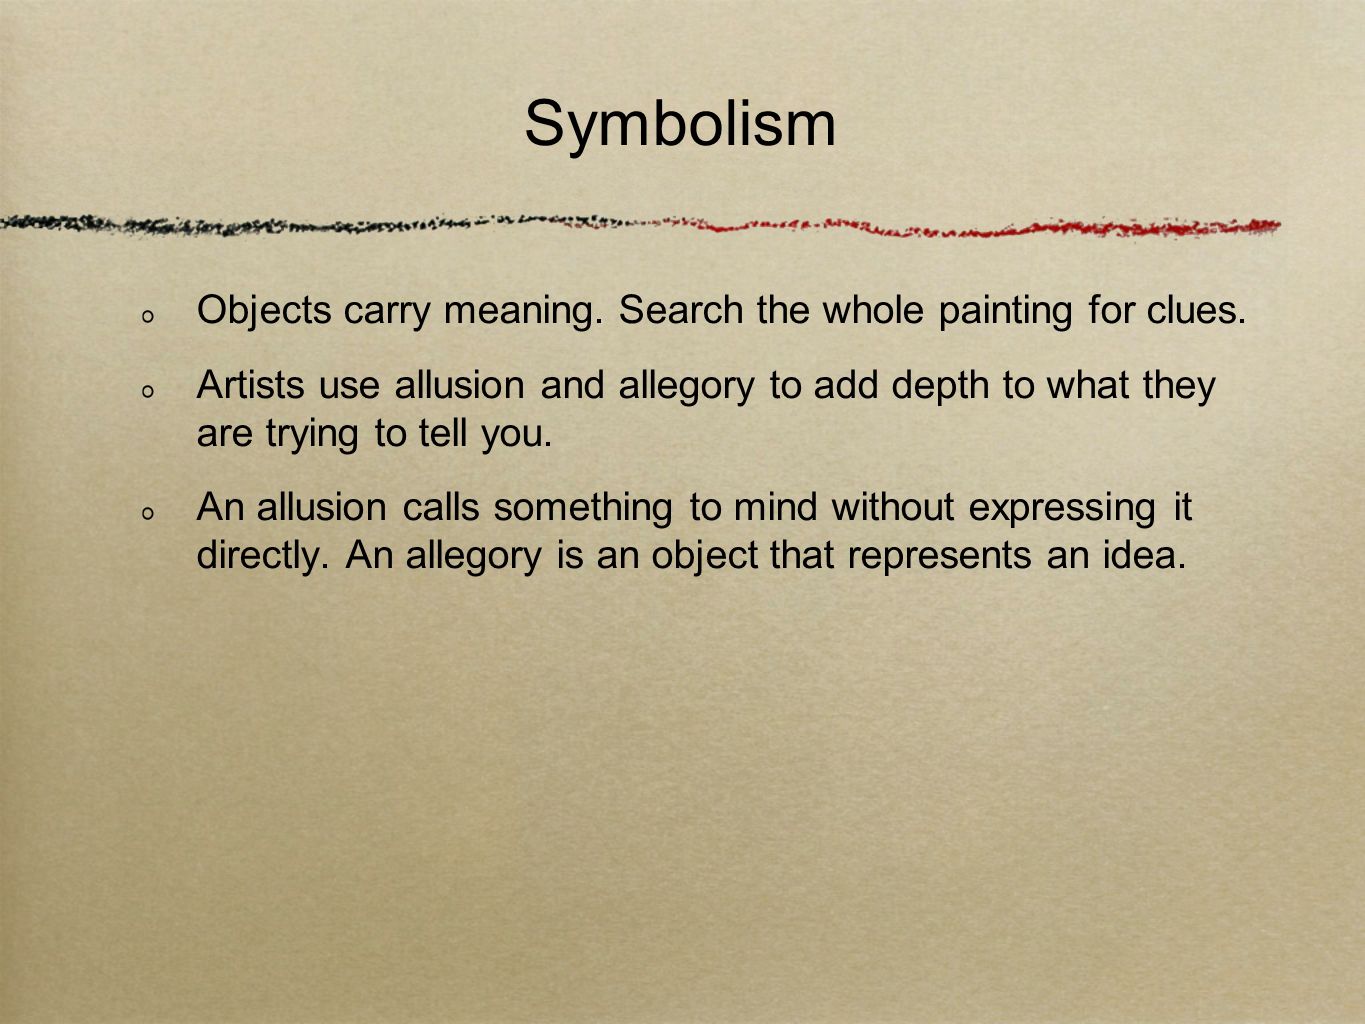 Symbolism Objects carry meaning. Search the whole painting for clues.